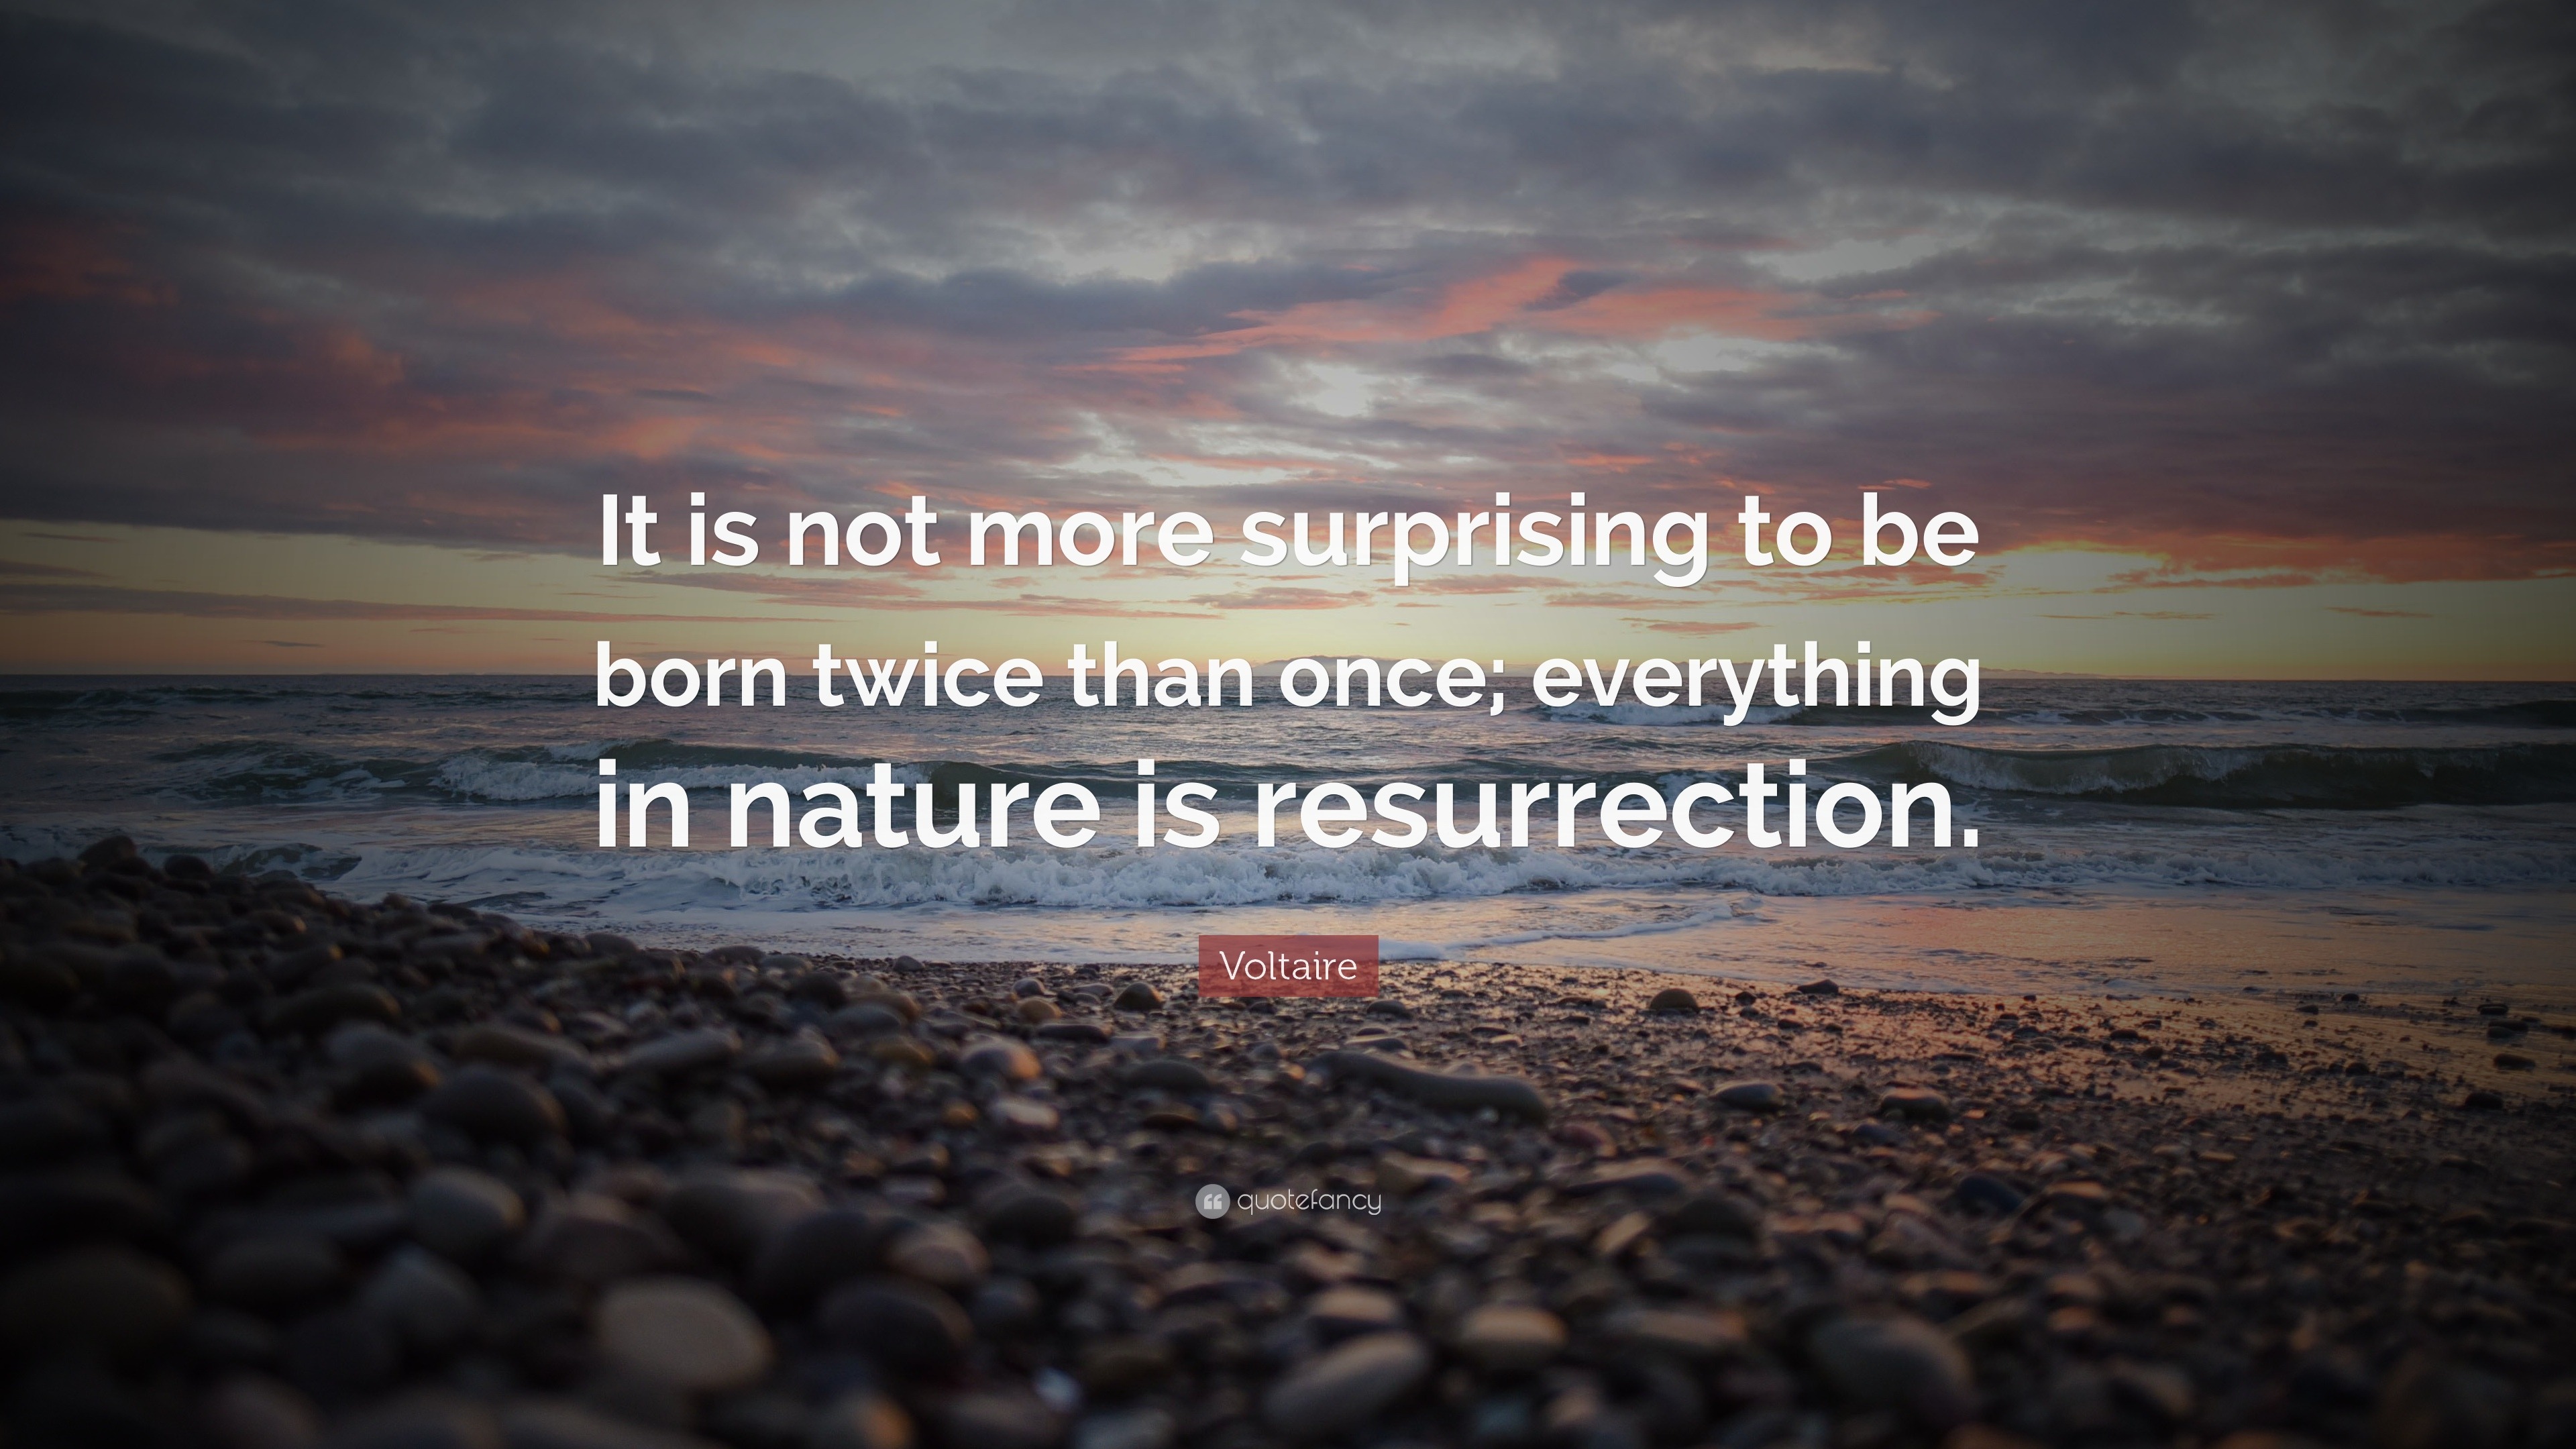 Voltaire Quote: “It is not more surprising to be born twice than once ...